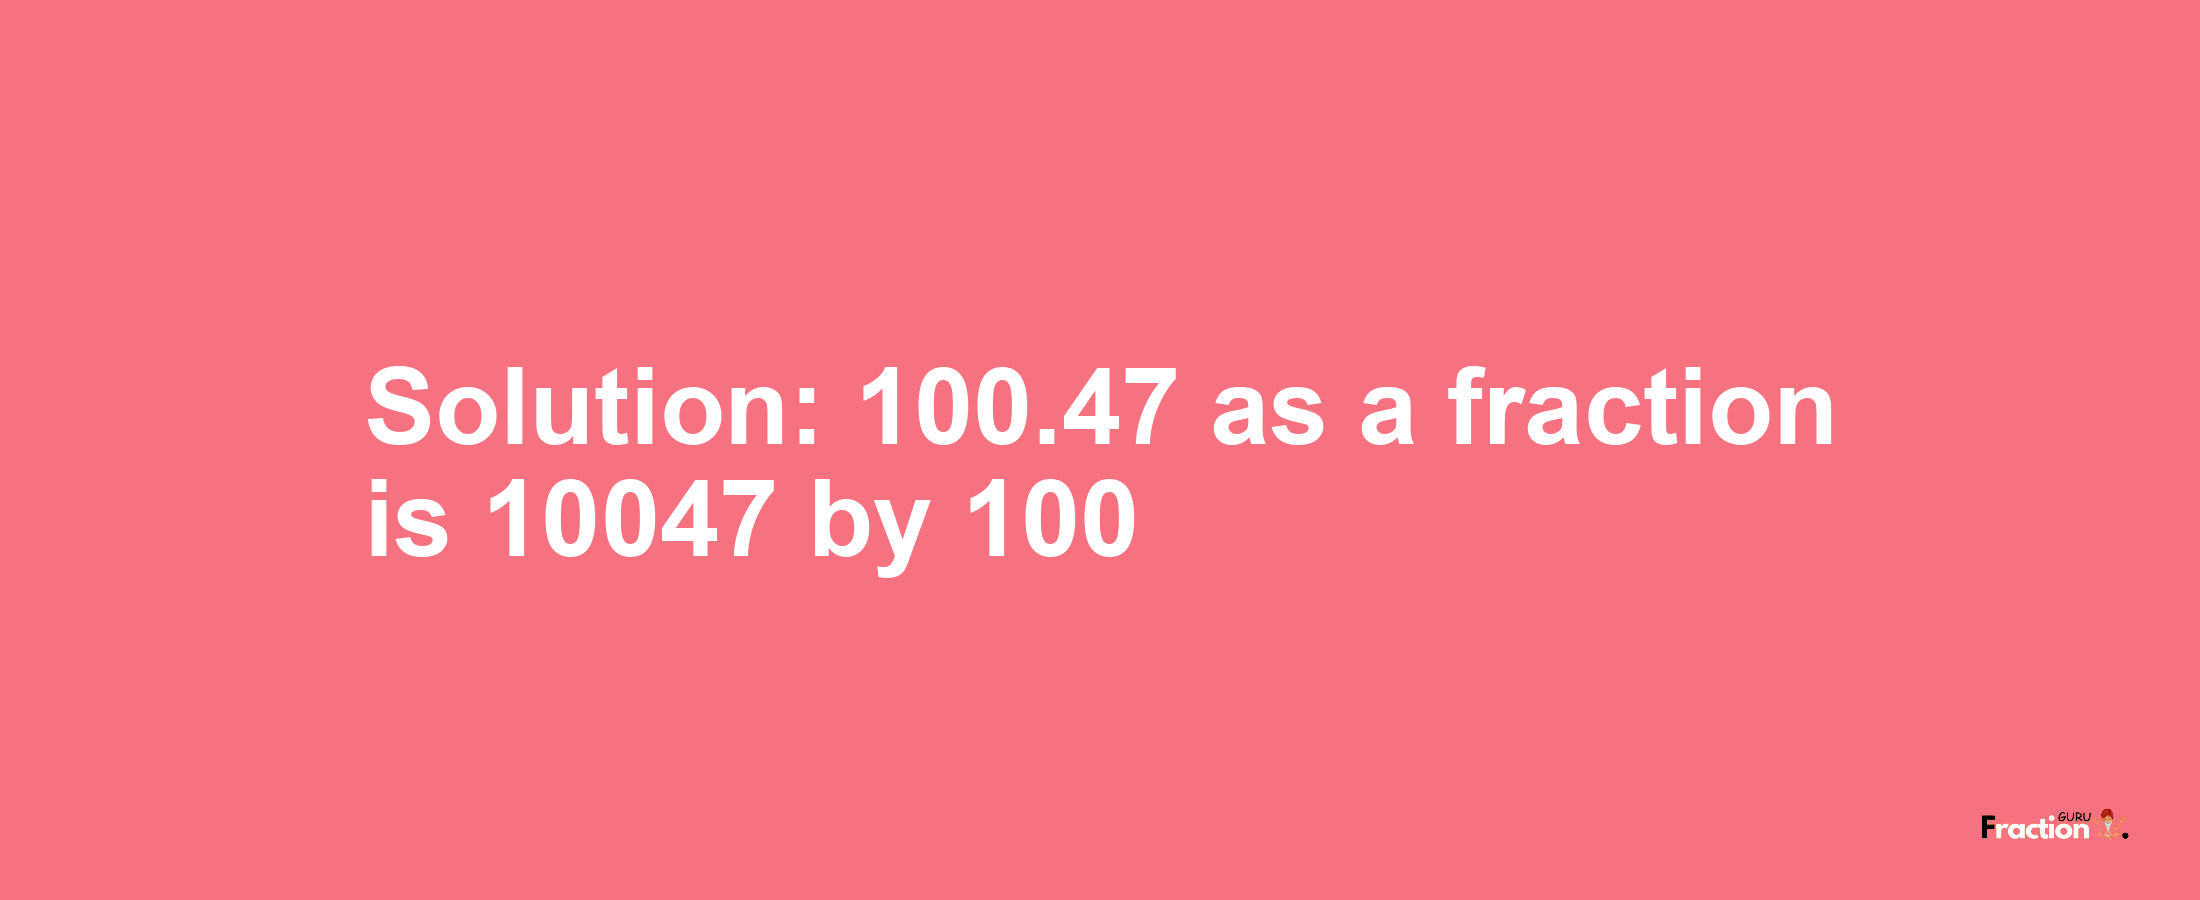 Solution:100.47 as a fraction is 10047/100